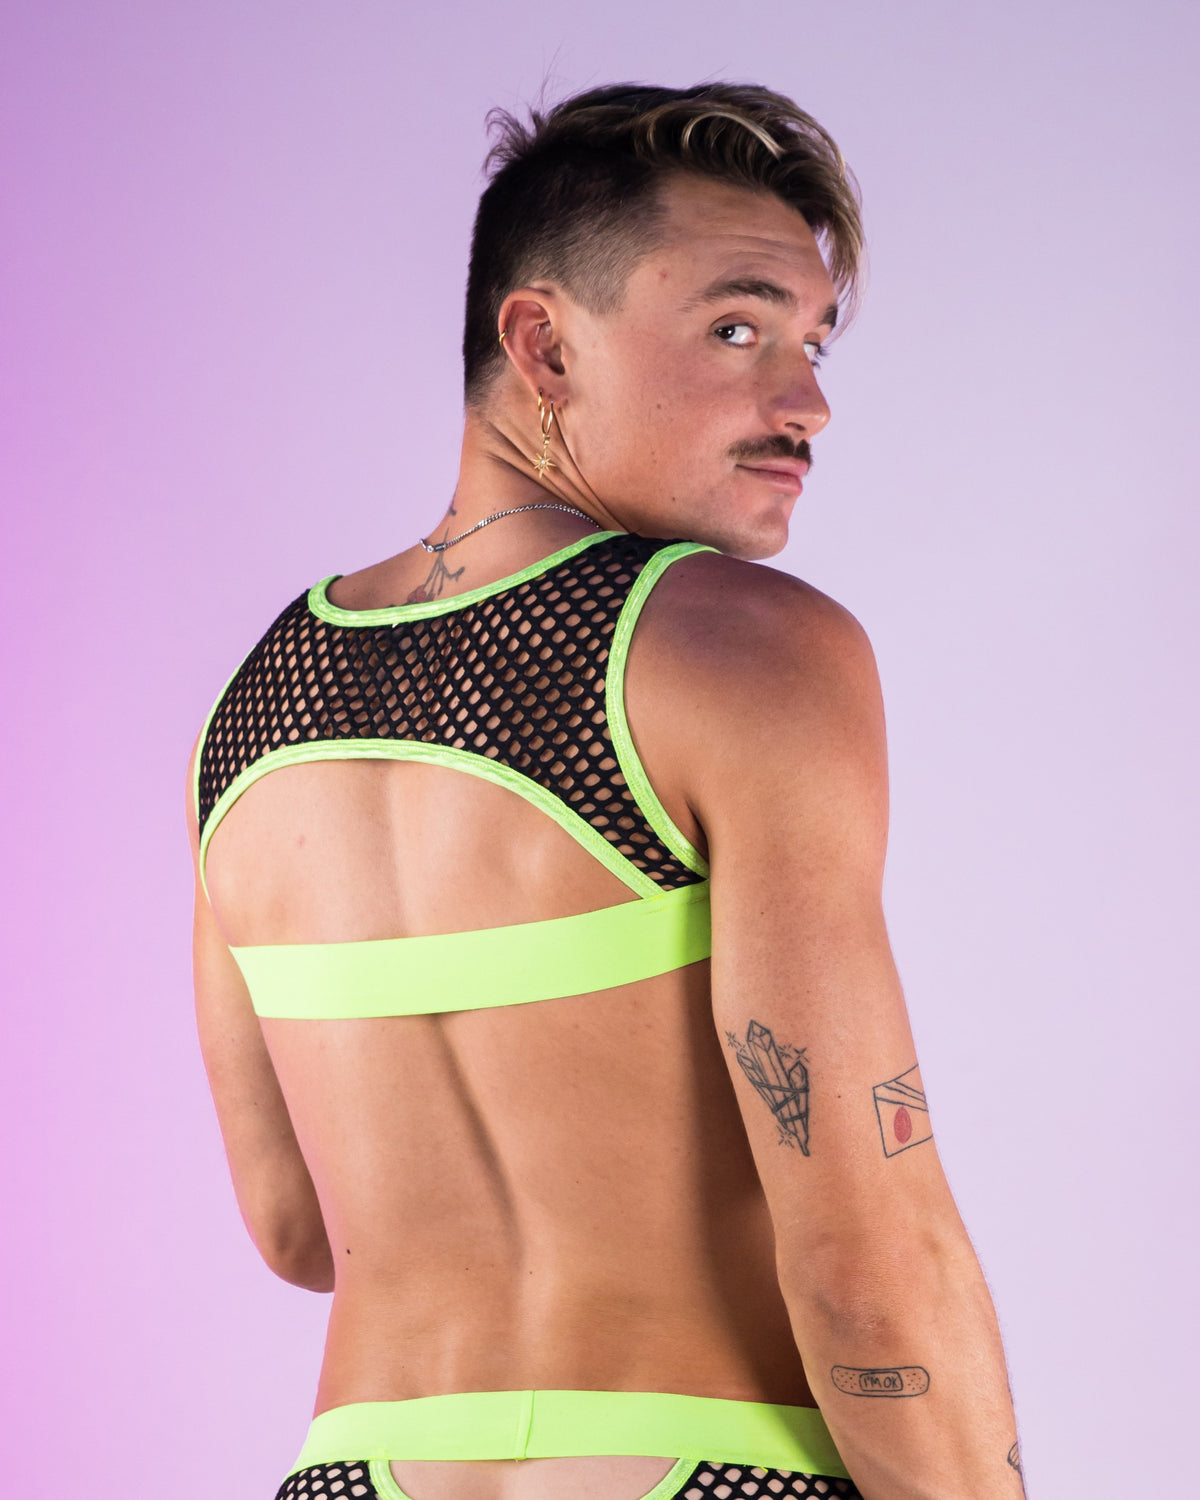 Men's Fishnet Cropped Tank Top w/ Glow In The Dark Elastic and Stud Details